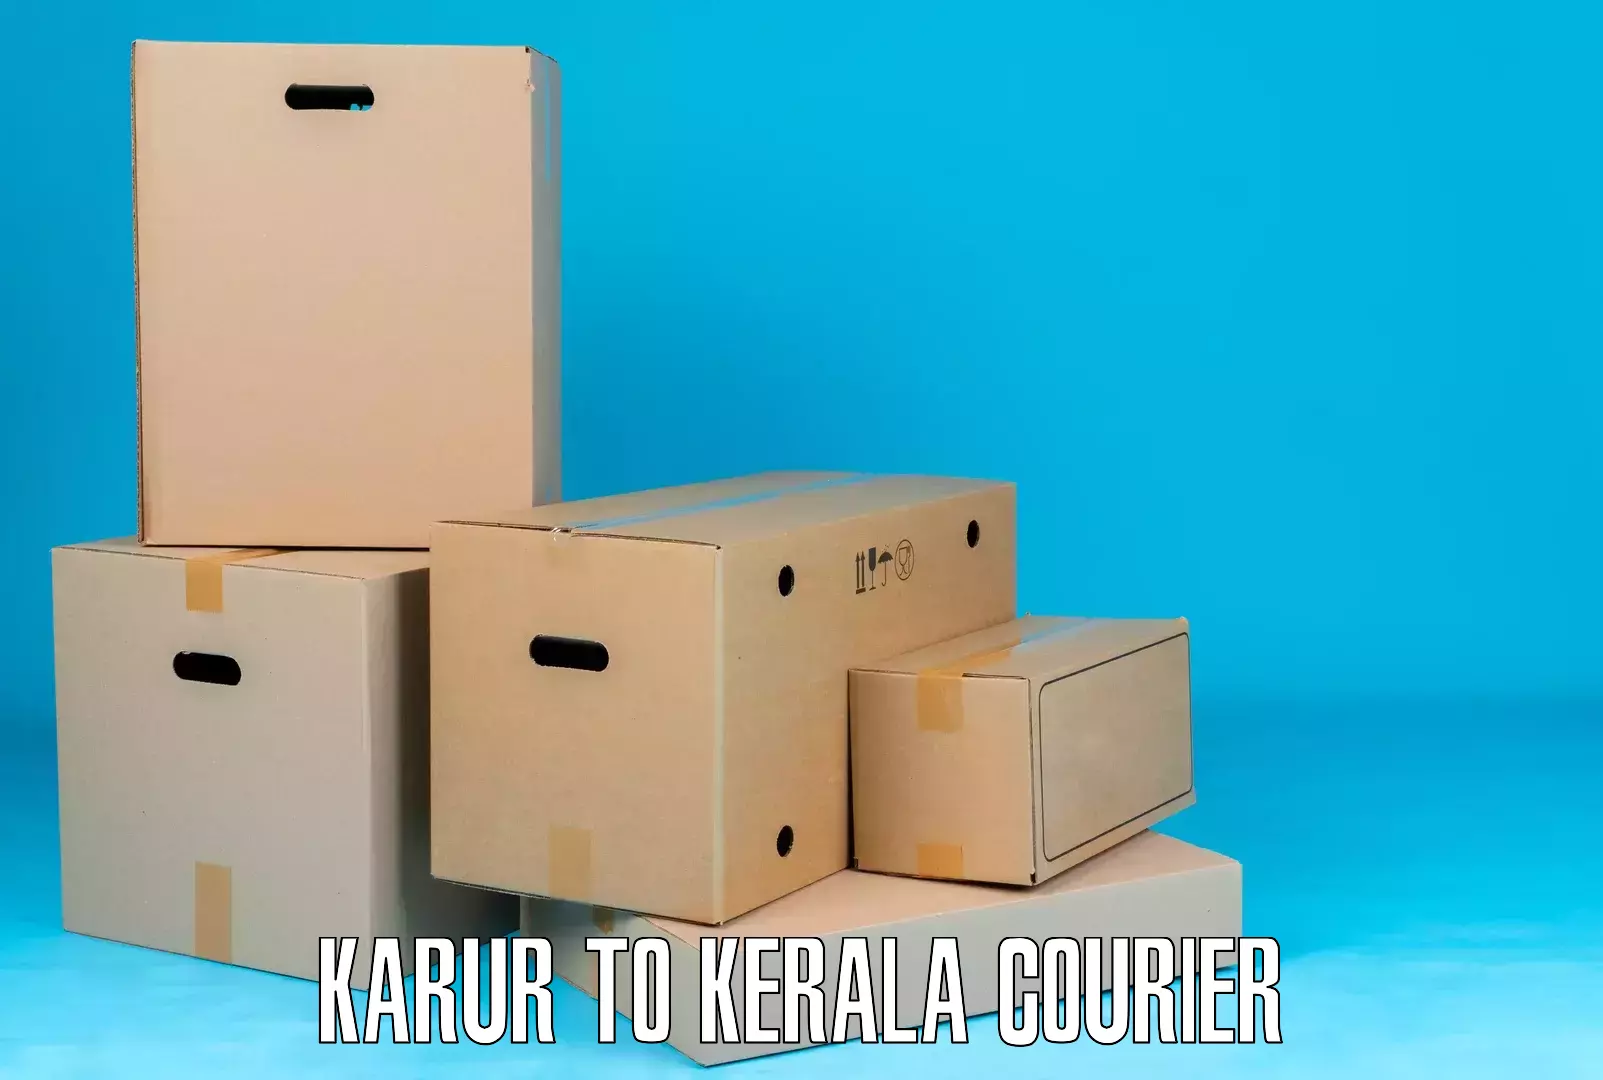 User-friendly delivery service Karur to Malappuram